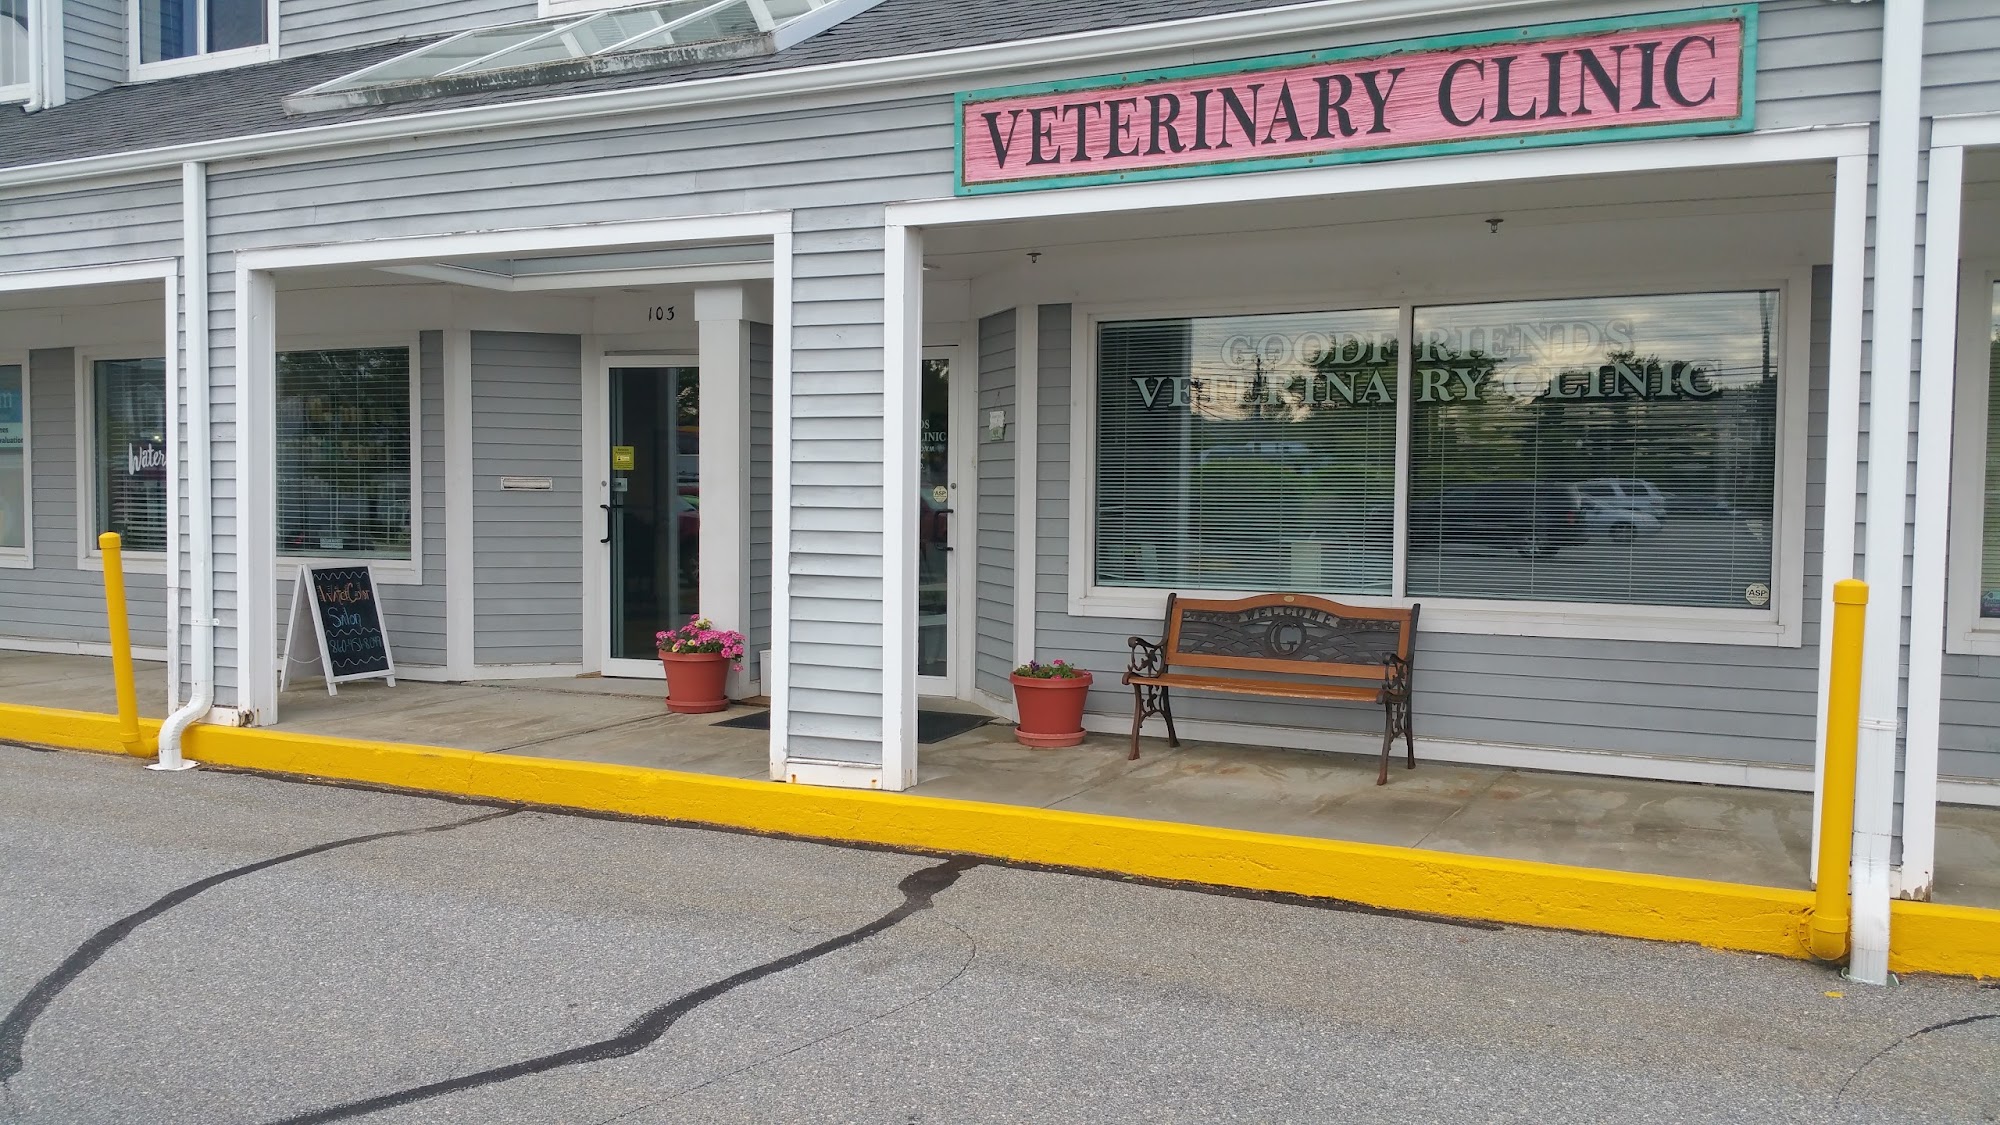 Goodfriends Veterinary Clinic 339 Flanders Rd # 104, East Lyme Connecticut 06333